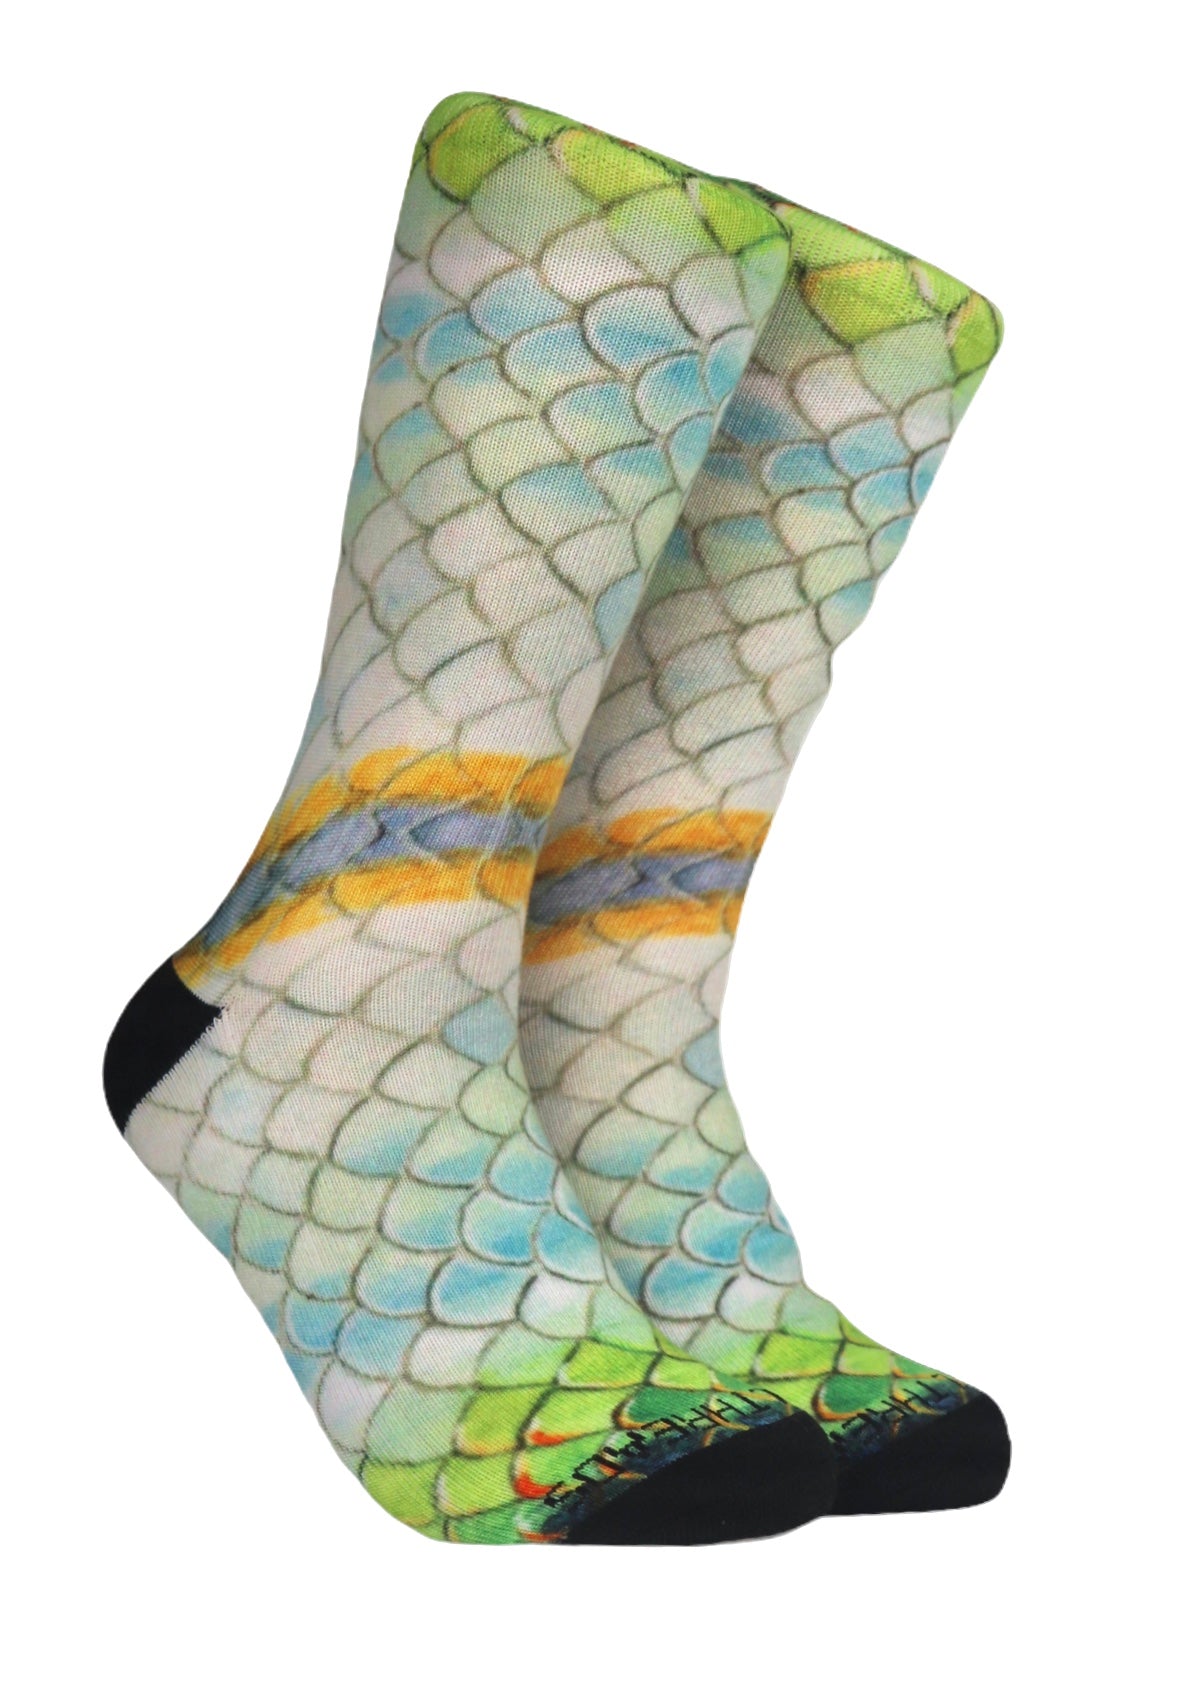 Tarpon Socks - Fish Patterned Clothing- Gifts for Anglers – Reel